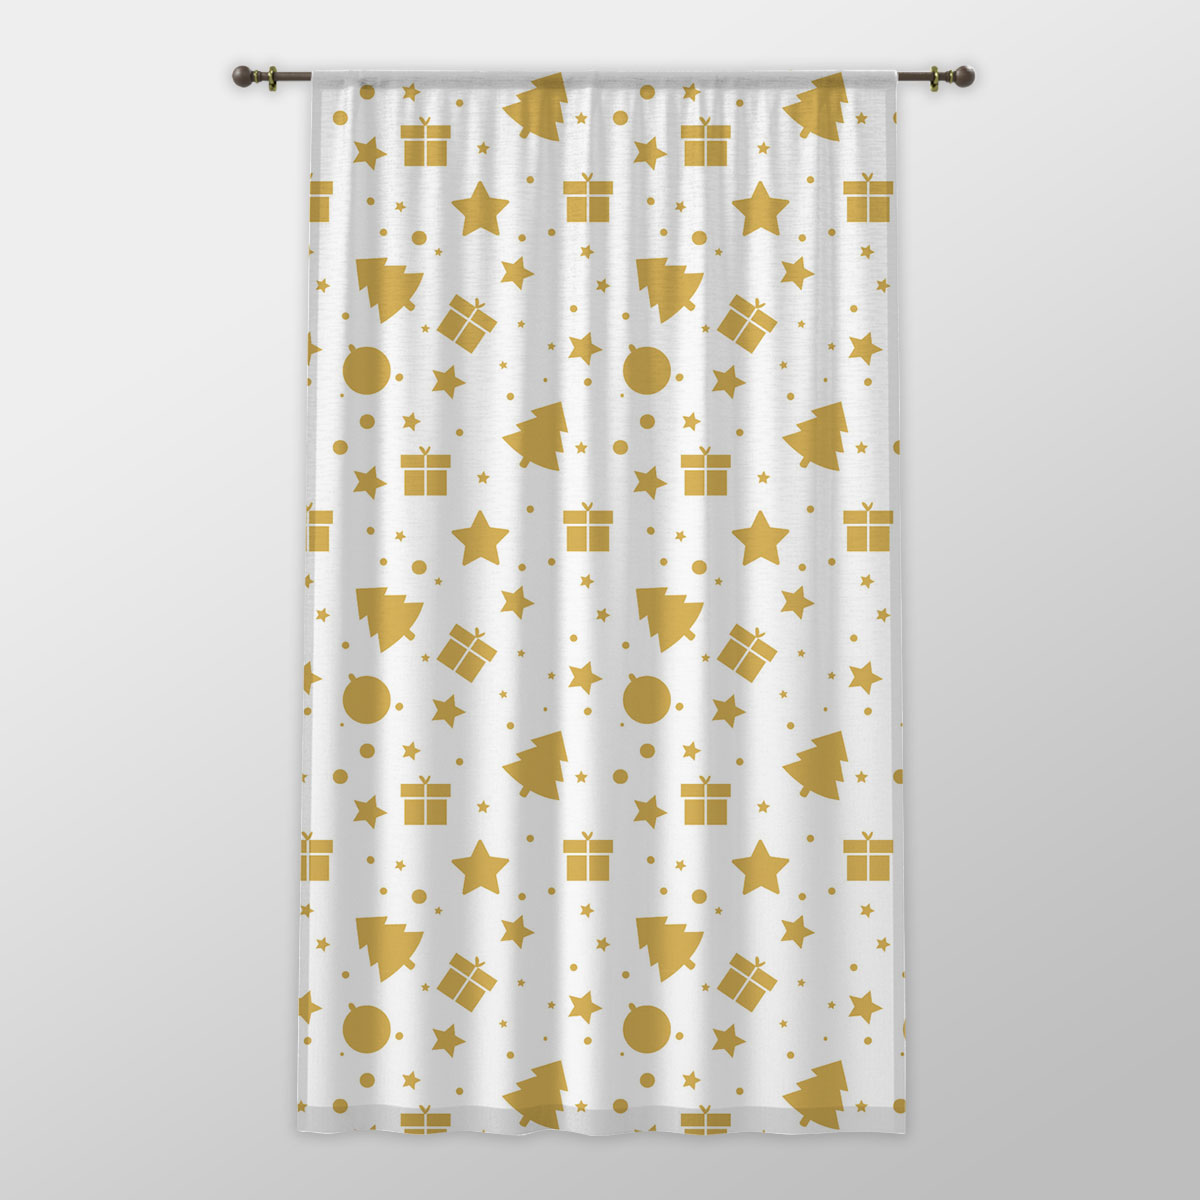 Christmas Gifts, Baudles And Pine Tree Silhouette Filled In Gold Color Pattern One-side Printed Window Curtain